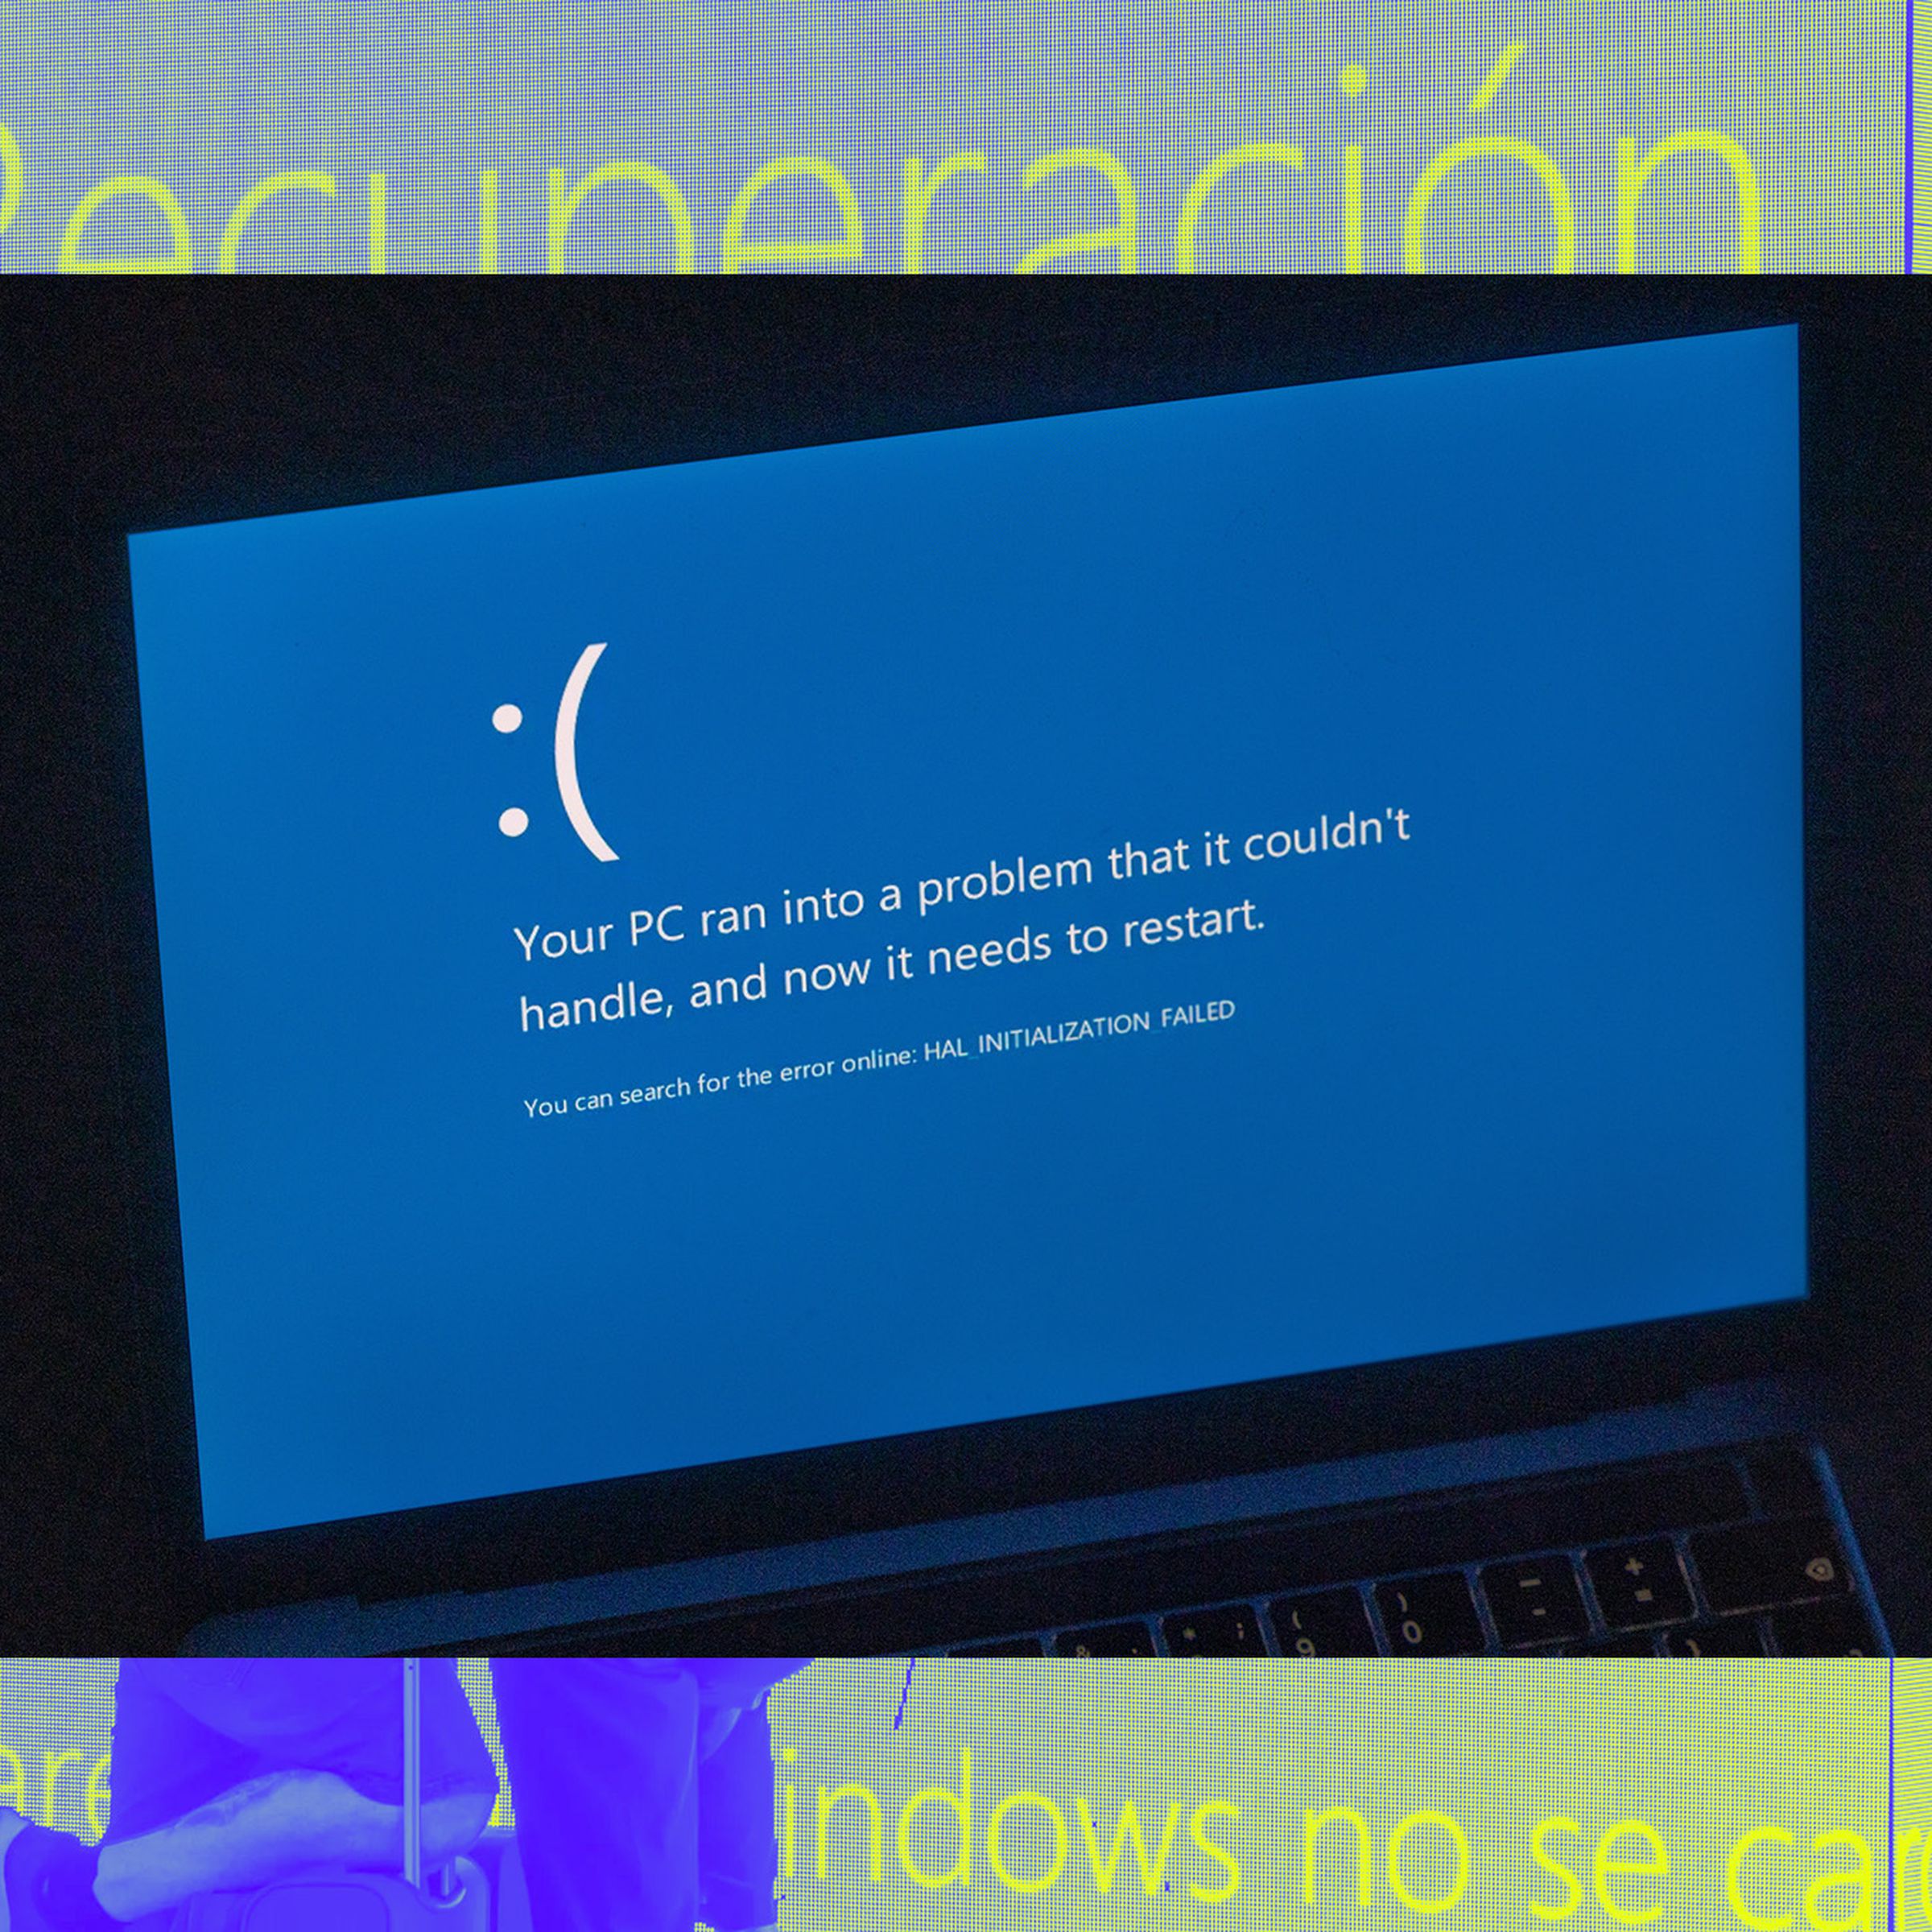 An image of a crashed Windows PC over a Vergecast illustration